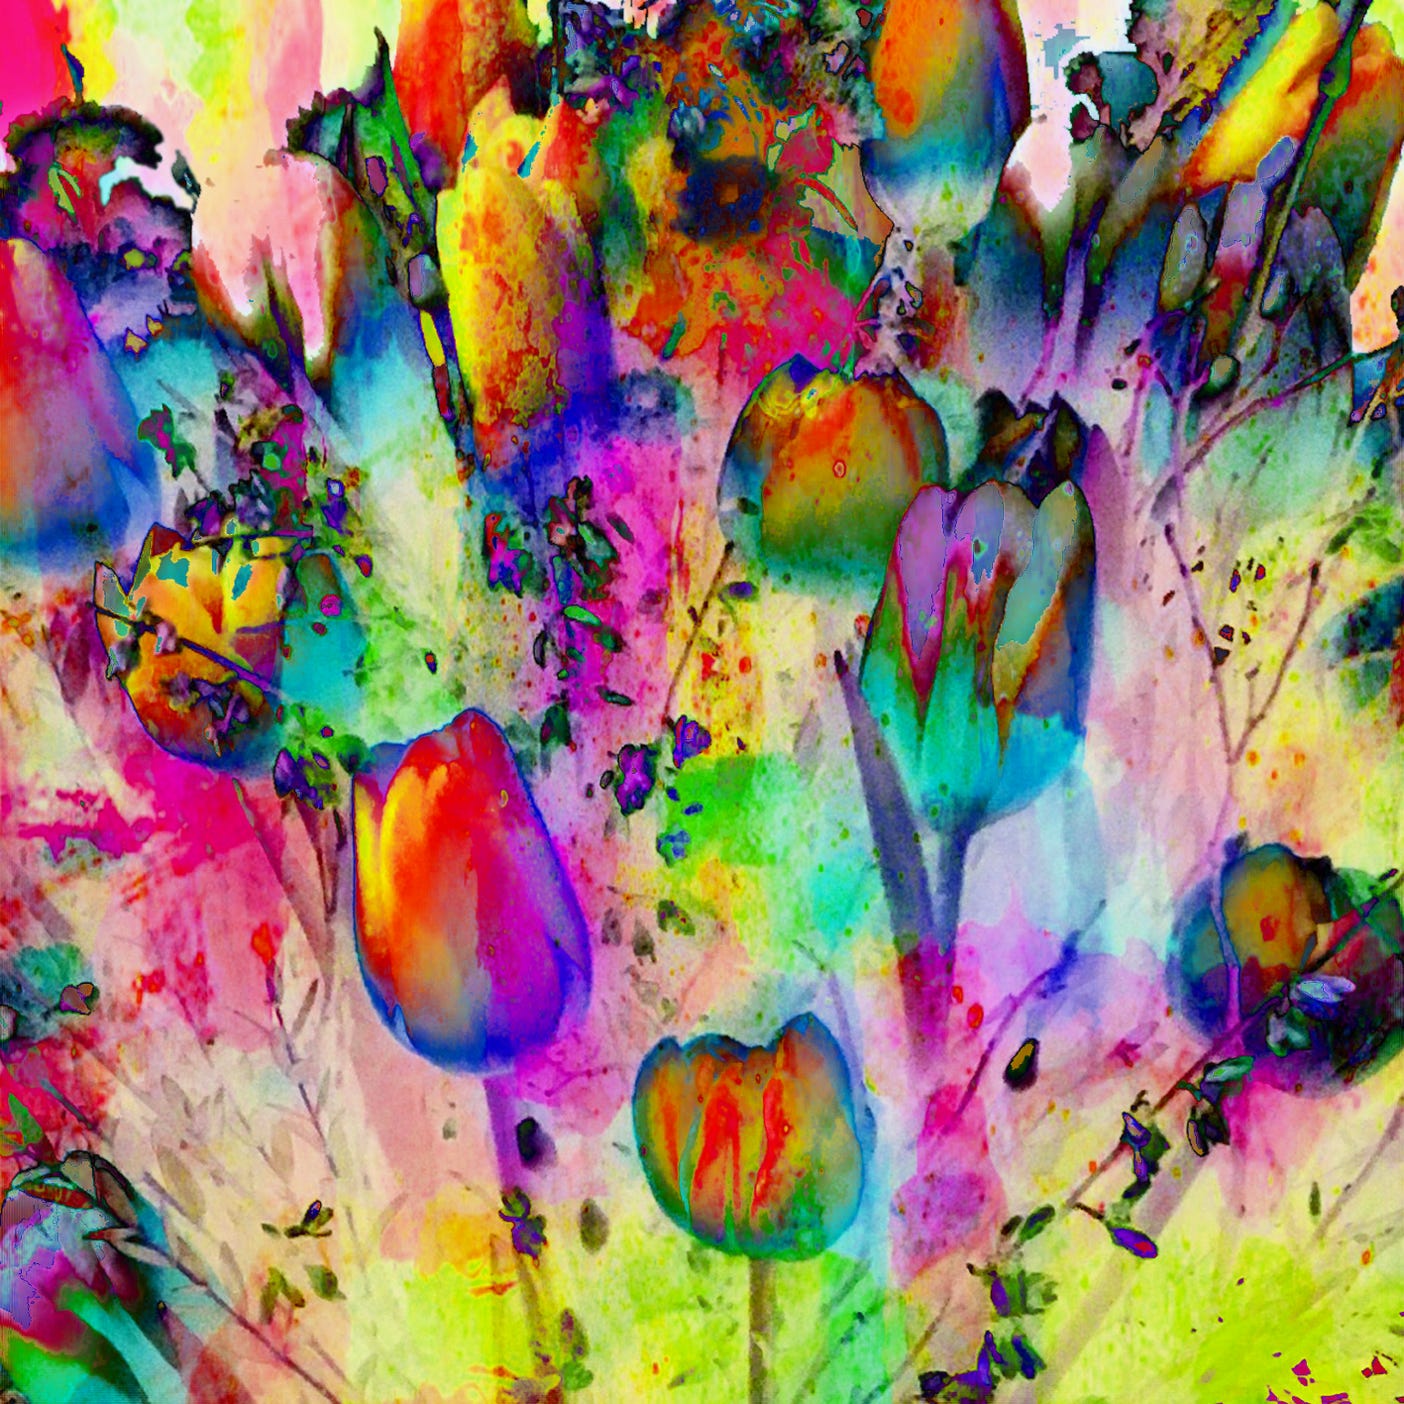 A colorful graphic work of spring tulips